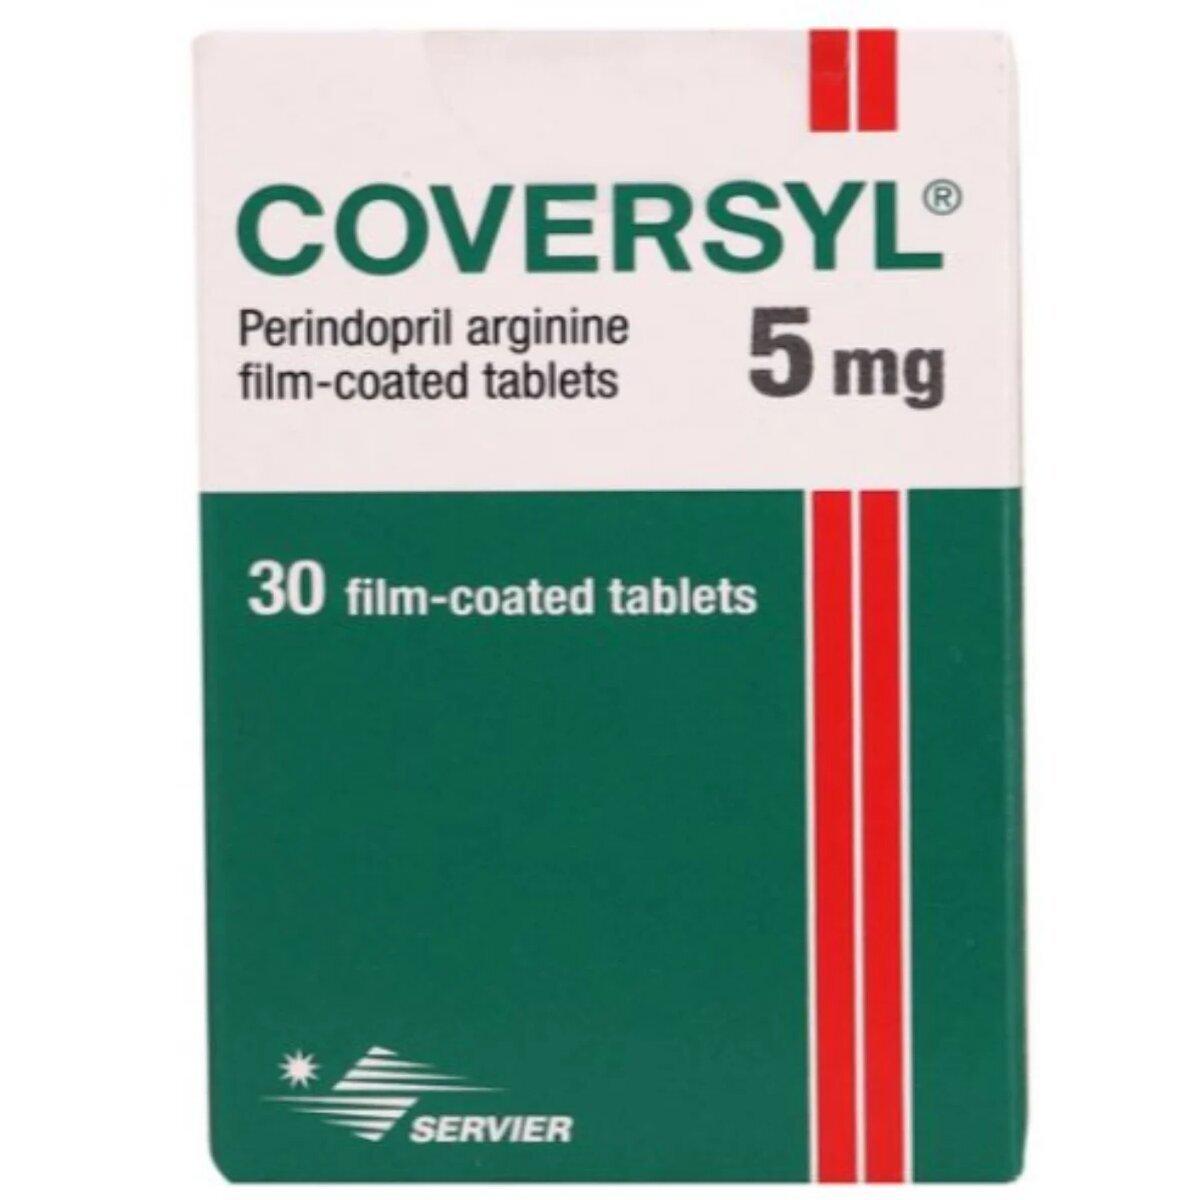 Coversyl 5mg Tablets